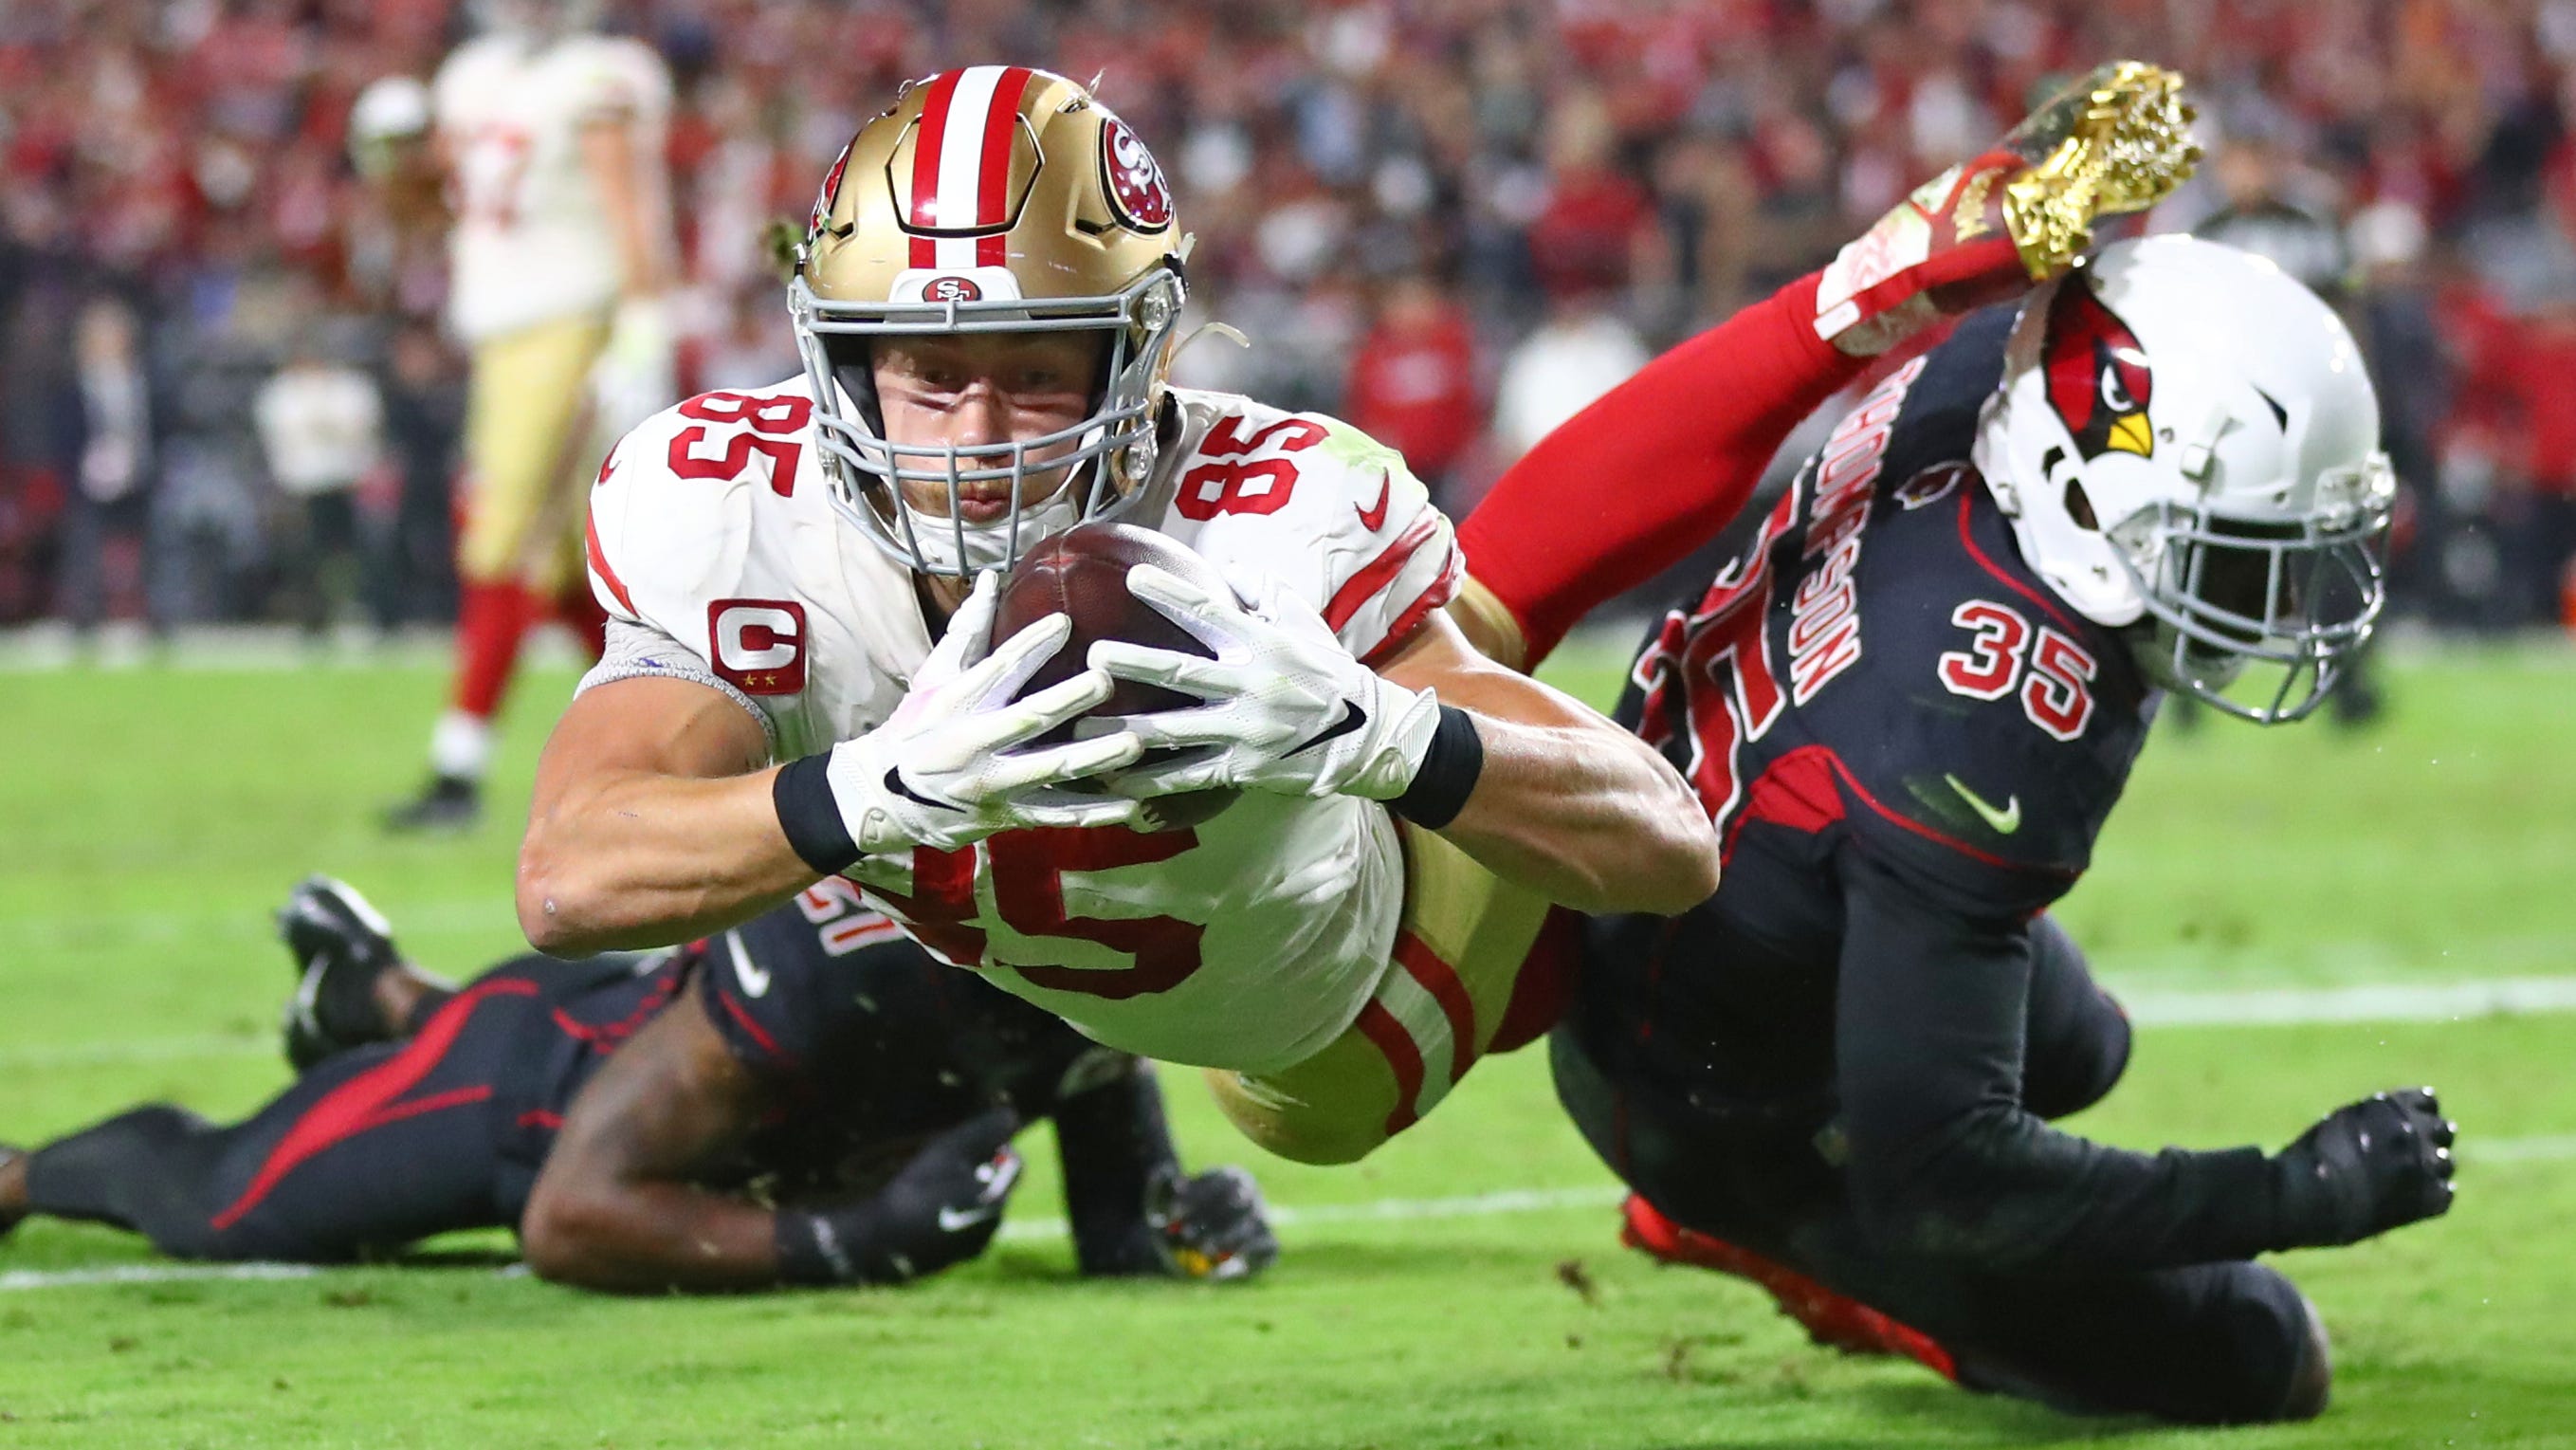 Kittle San Francisco 49ers' TE played with broken ankle